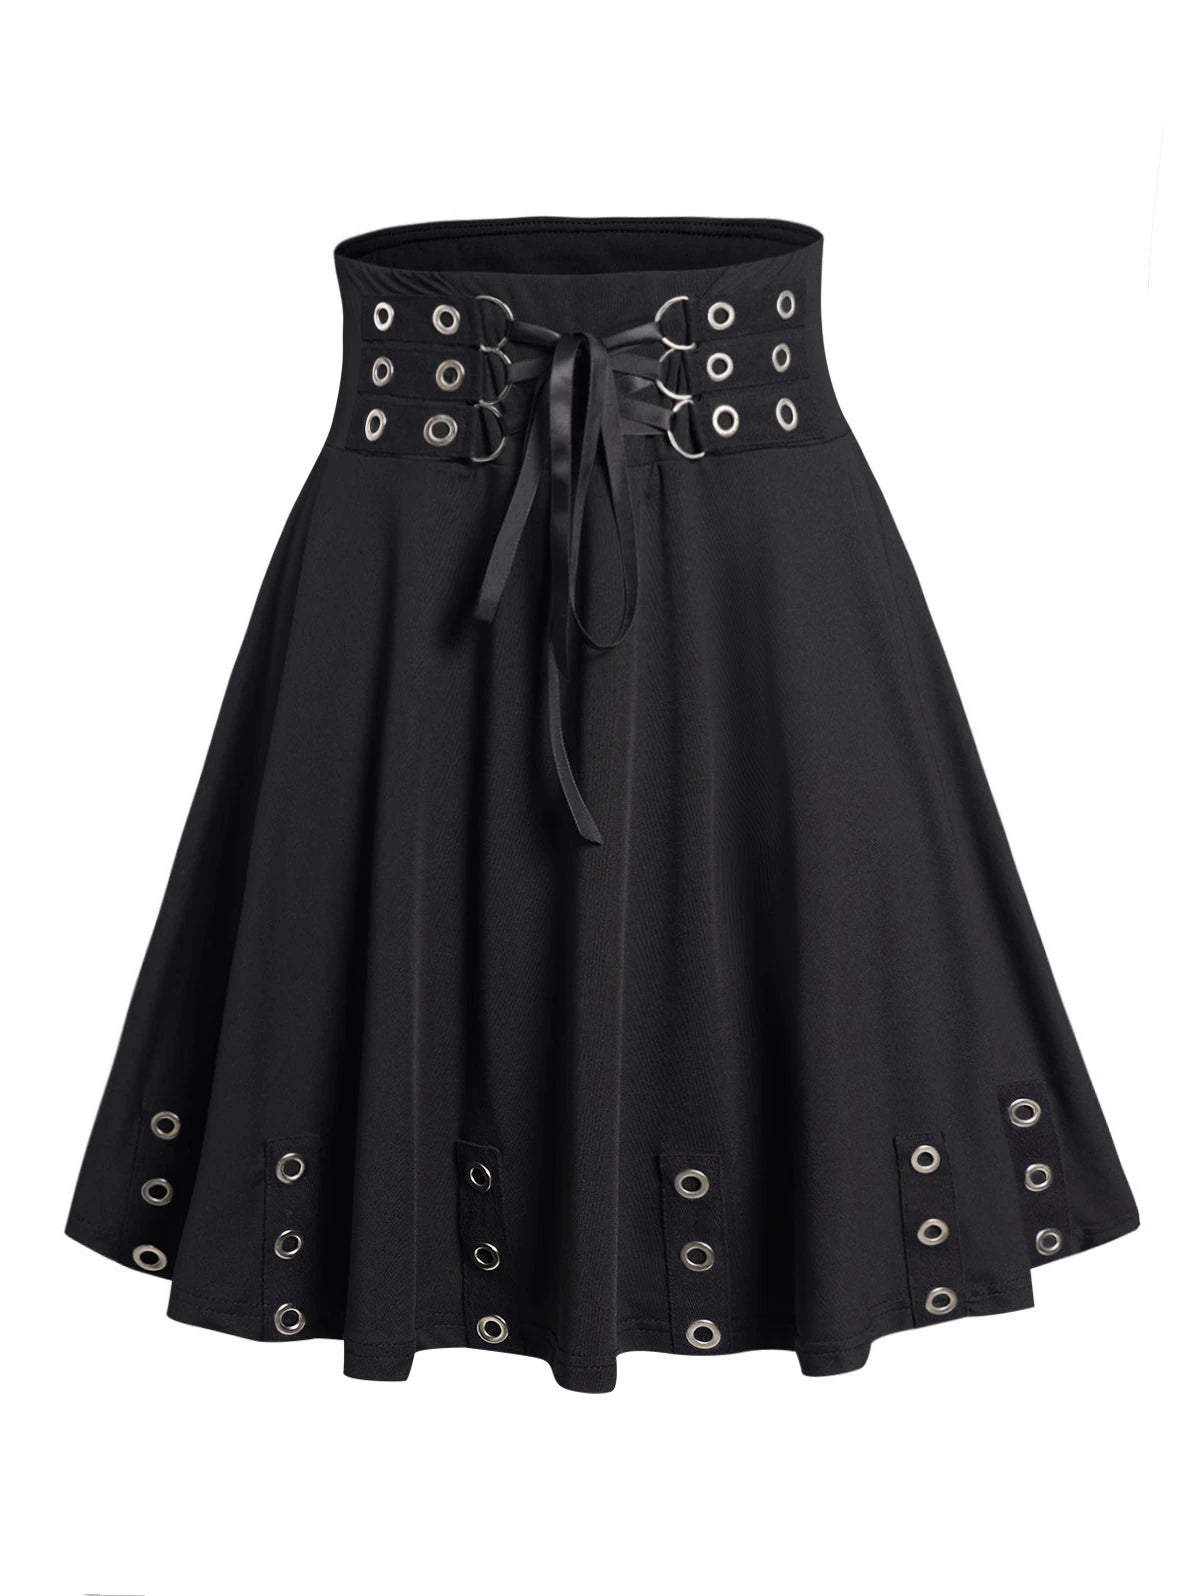 Mini Lace Up Gothic Skirt – The Official Strange & Creepy Store!